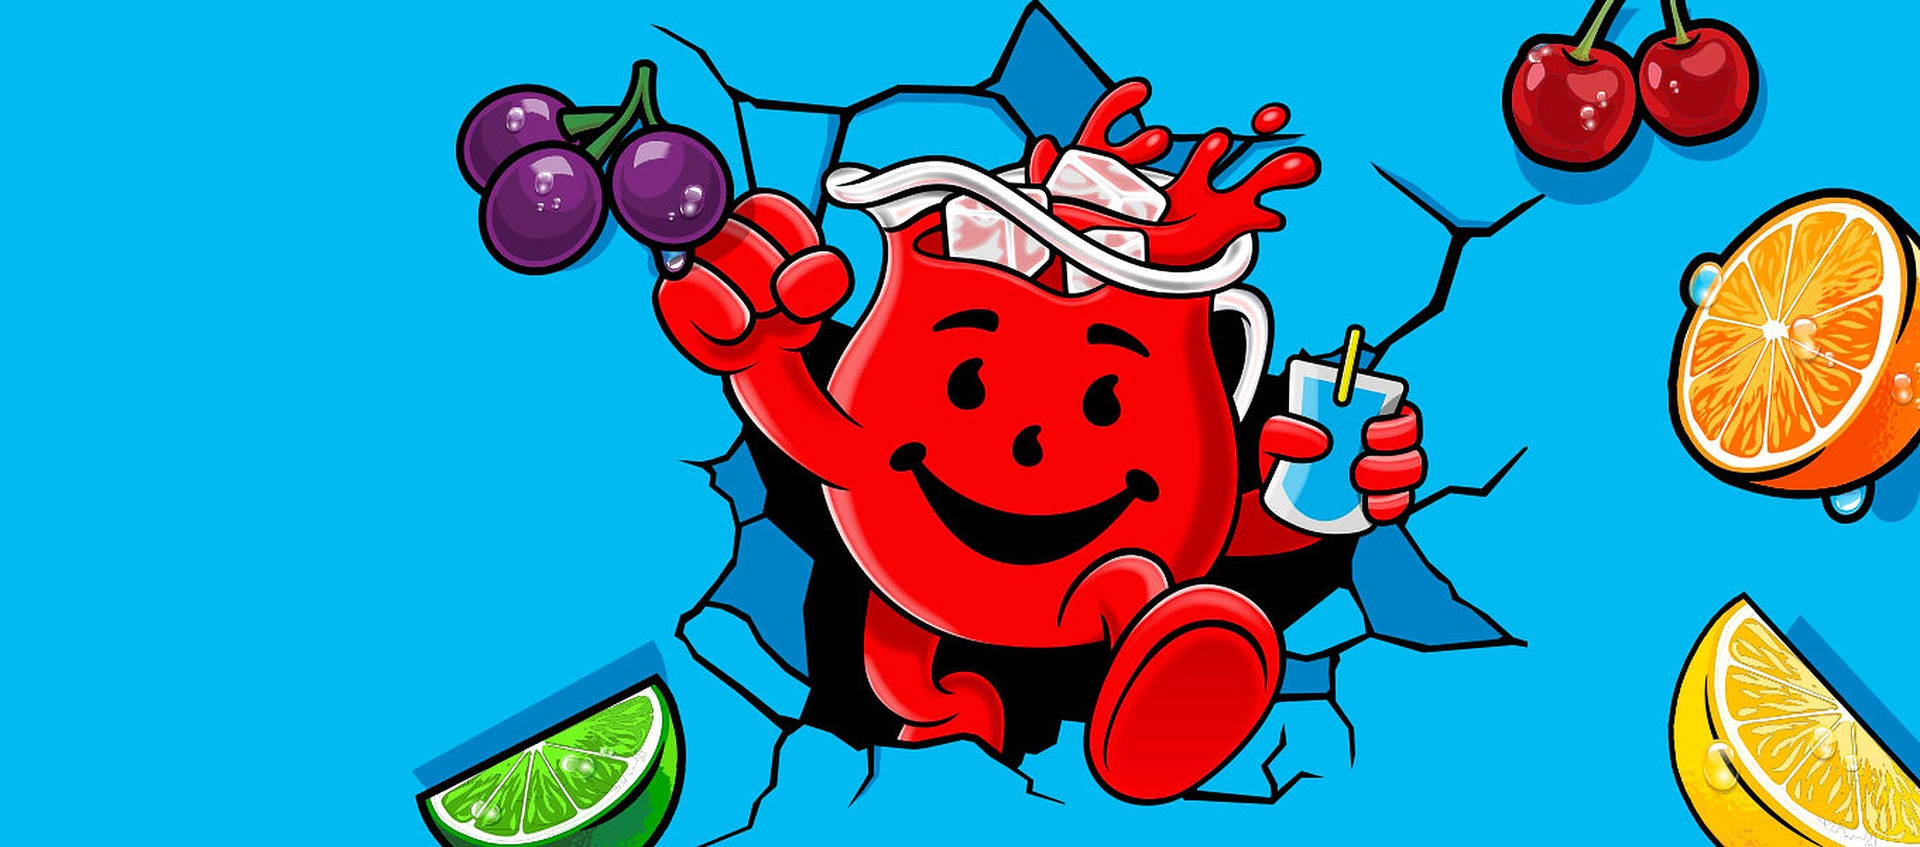 Kool-aid Man, The Iconic Drink Mascot, Surrounded By Assortment Of Fruits